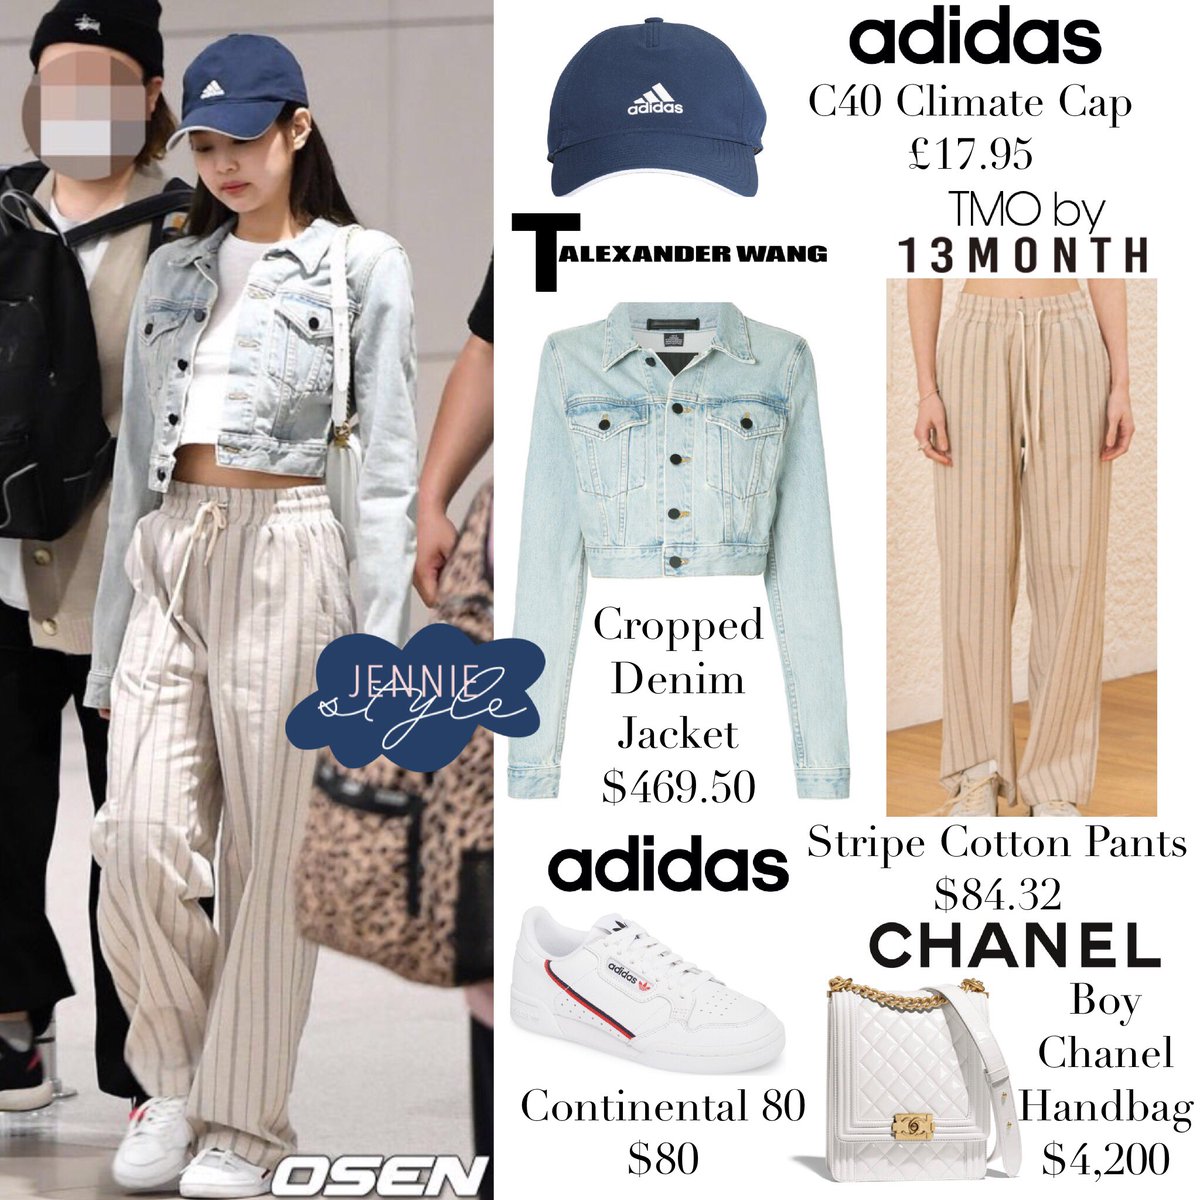 Jennie Style on X: Incheon Airport 190530 Adidas Cap £17.95, T by